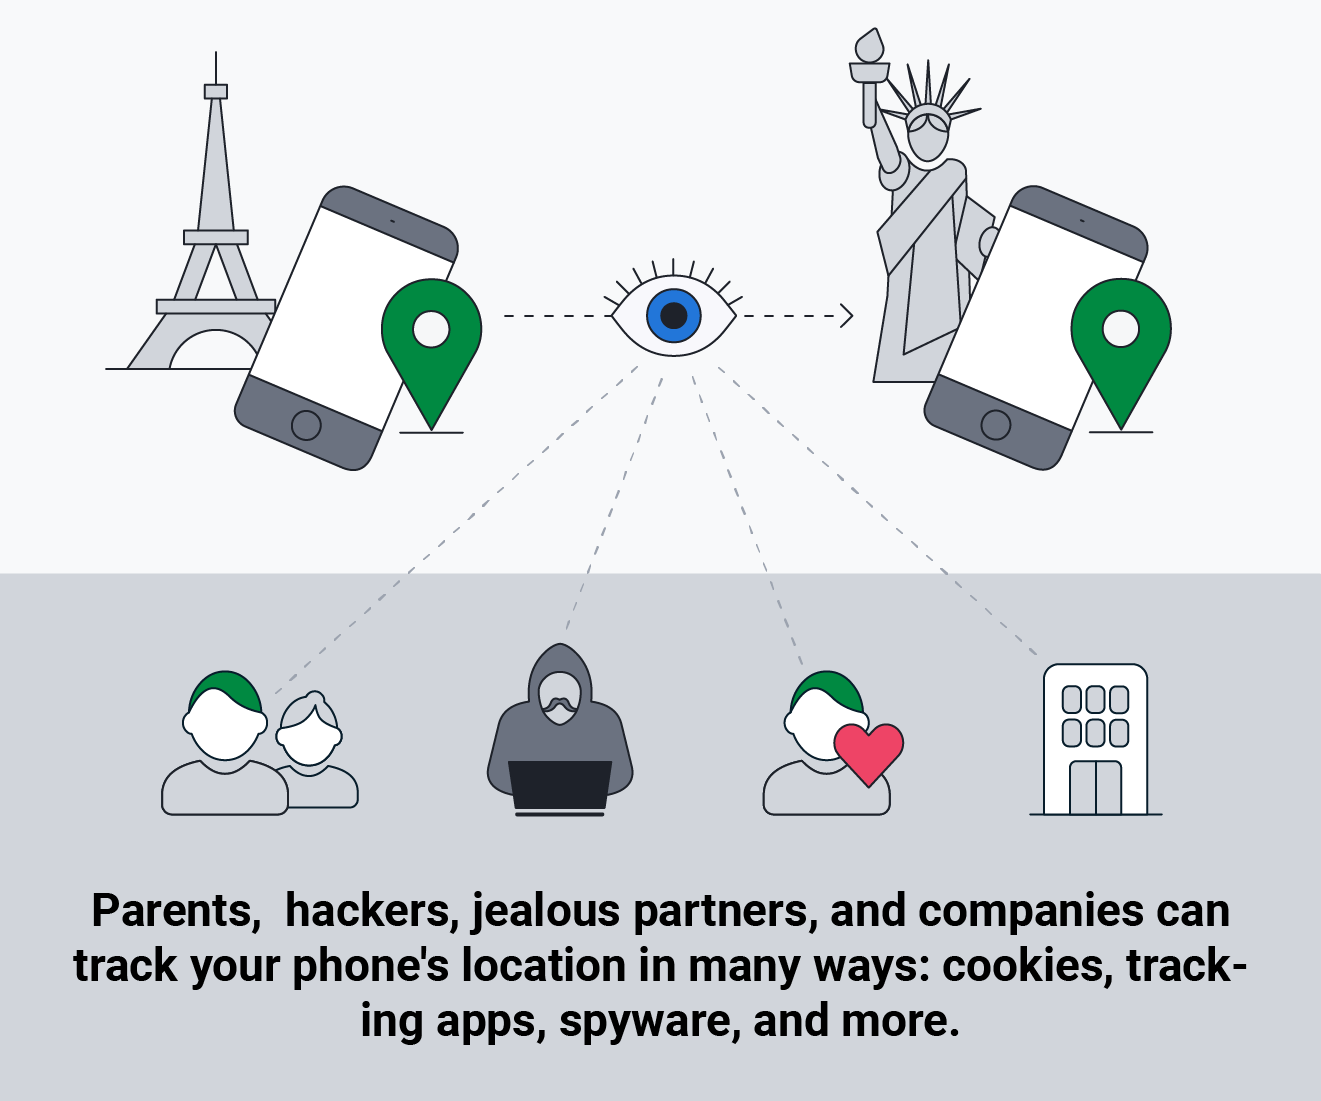 An illustration showing who can track your phone and how.